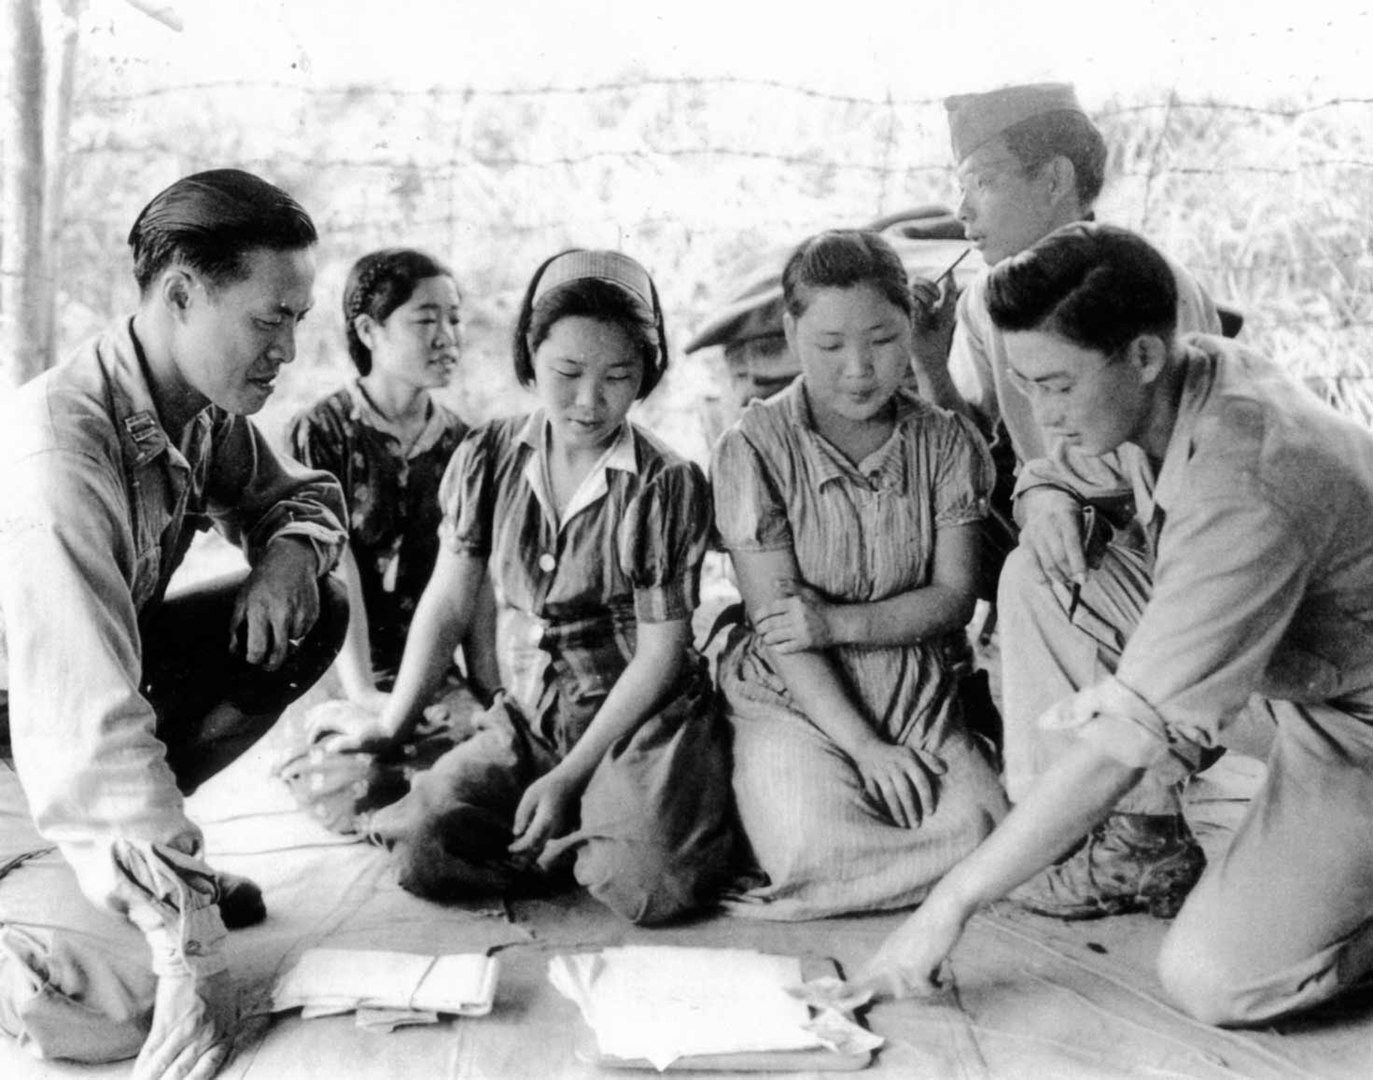 Comfort women captured by the U.S. Army, August 14, 1944, in Myitkyina.